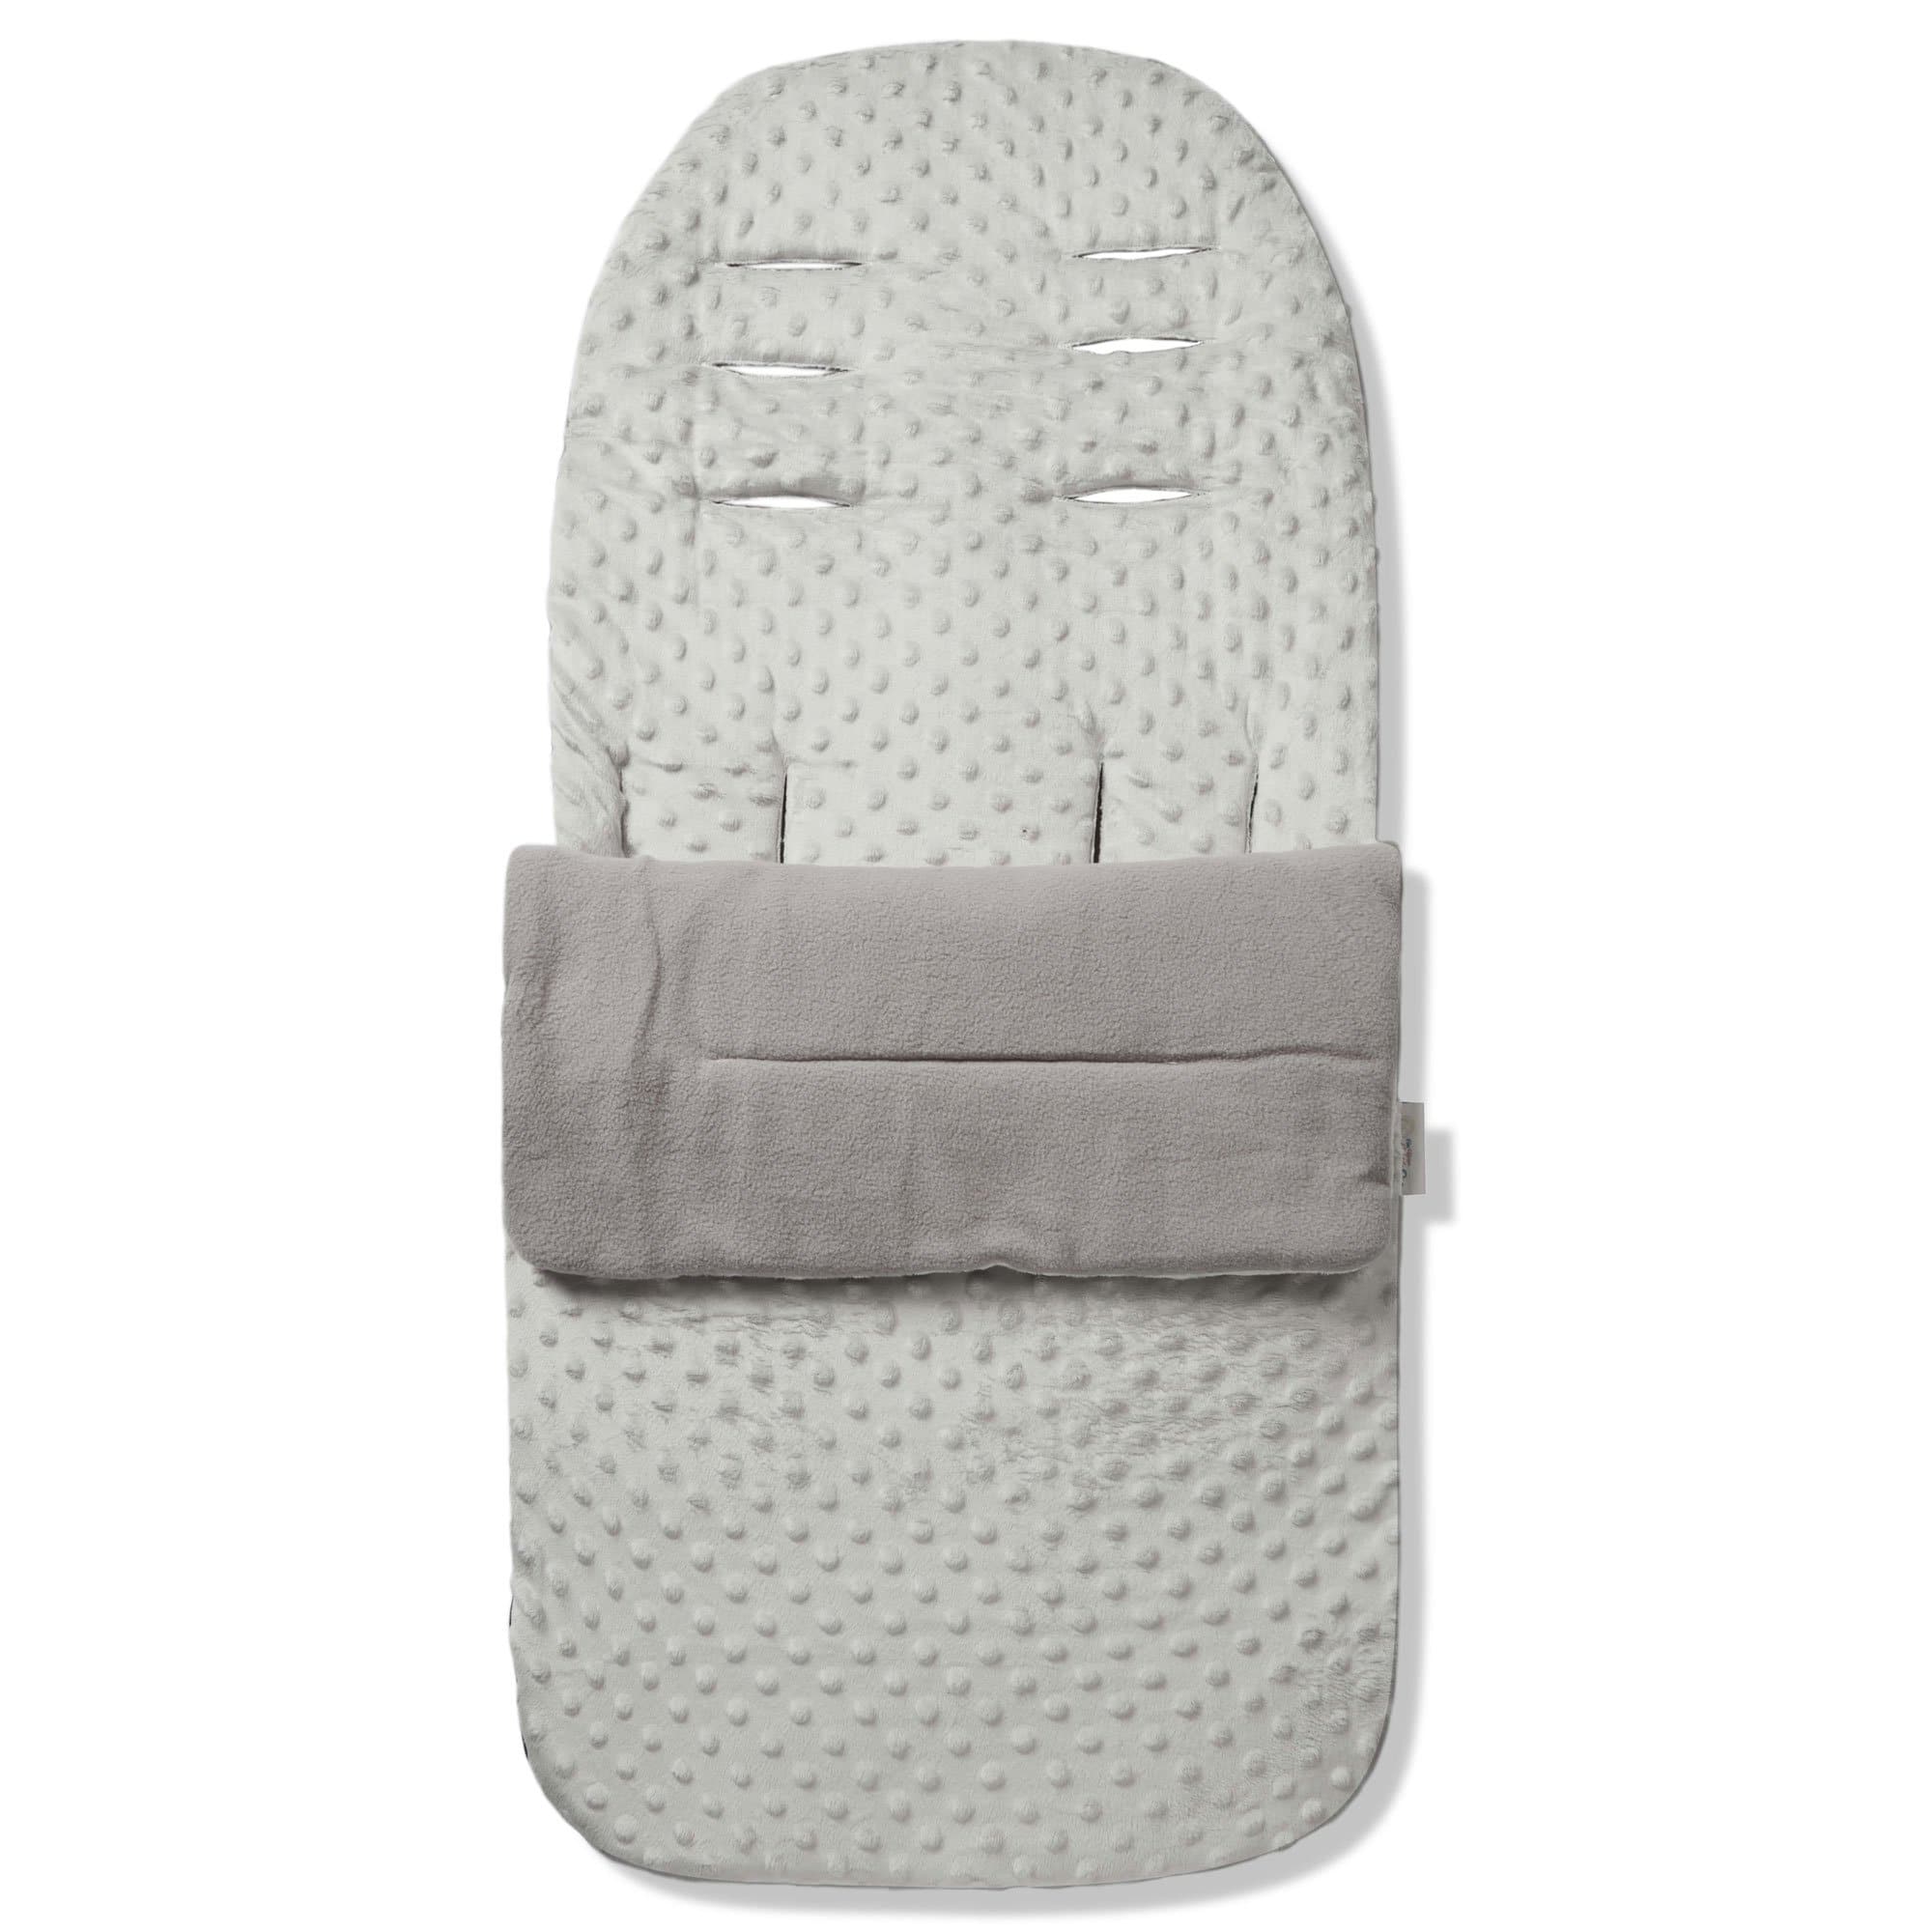 Dimple Footmuff / Cosy Toes Compatible with BabiesRus - Grey / Fits All Models | For Your Little One